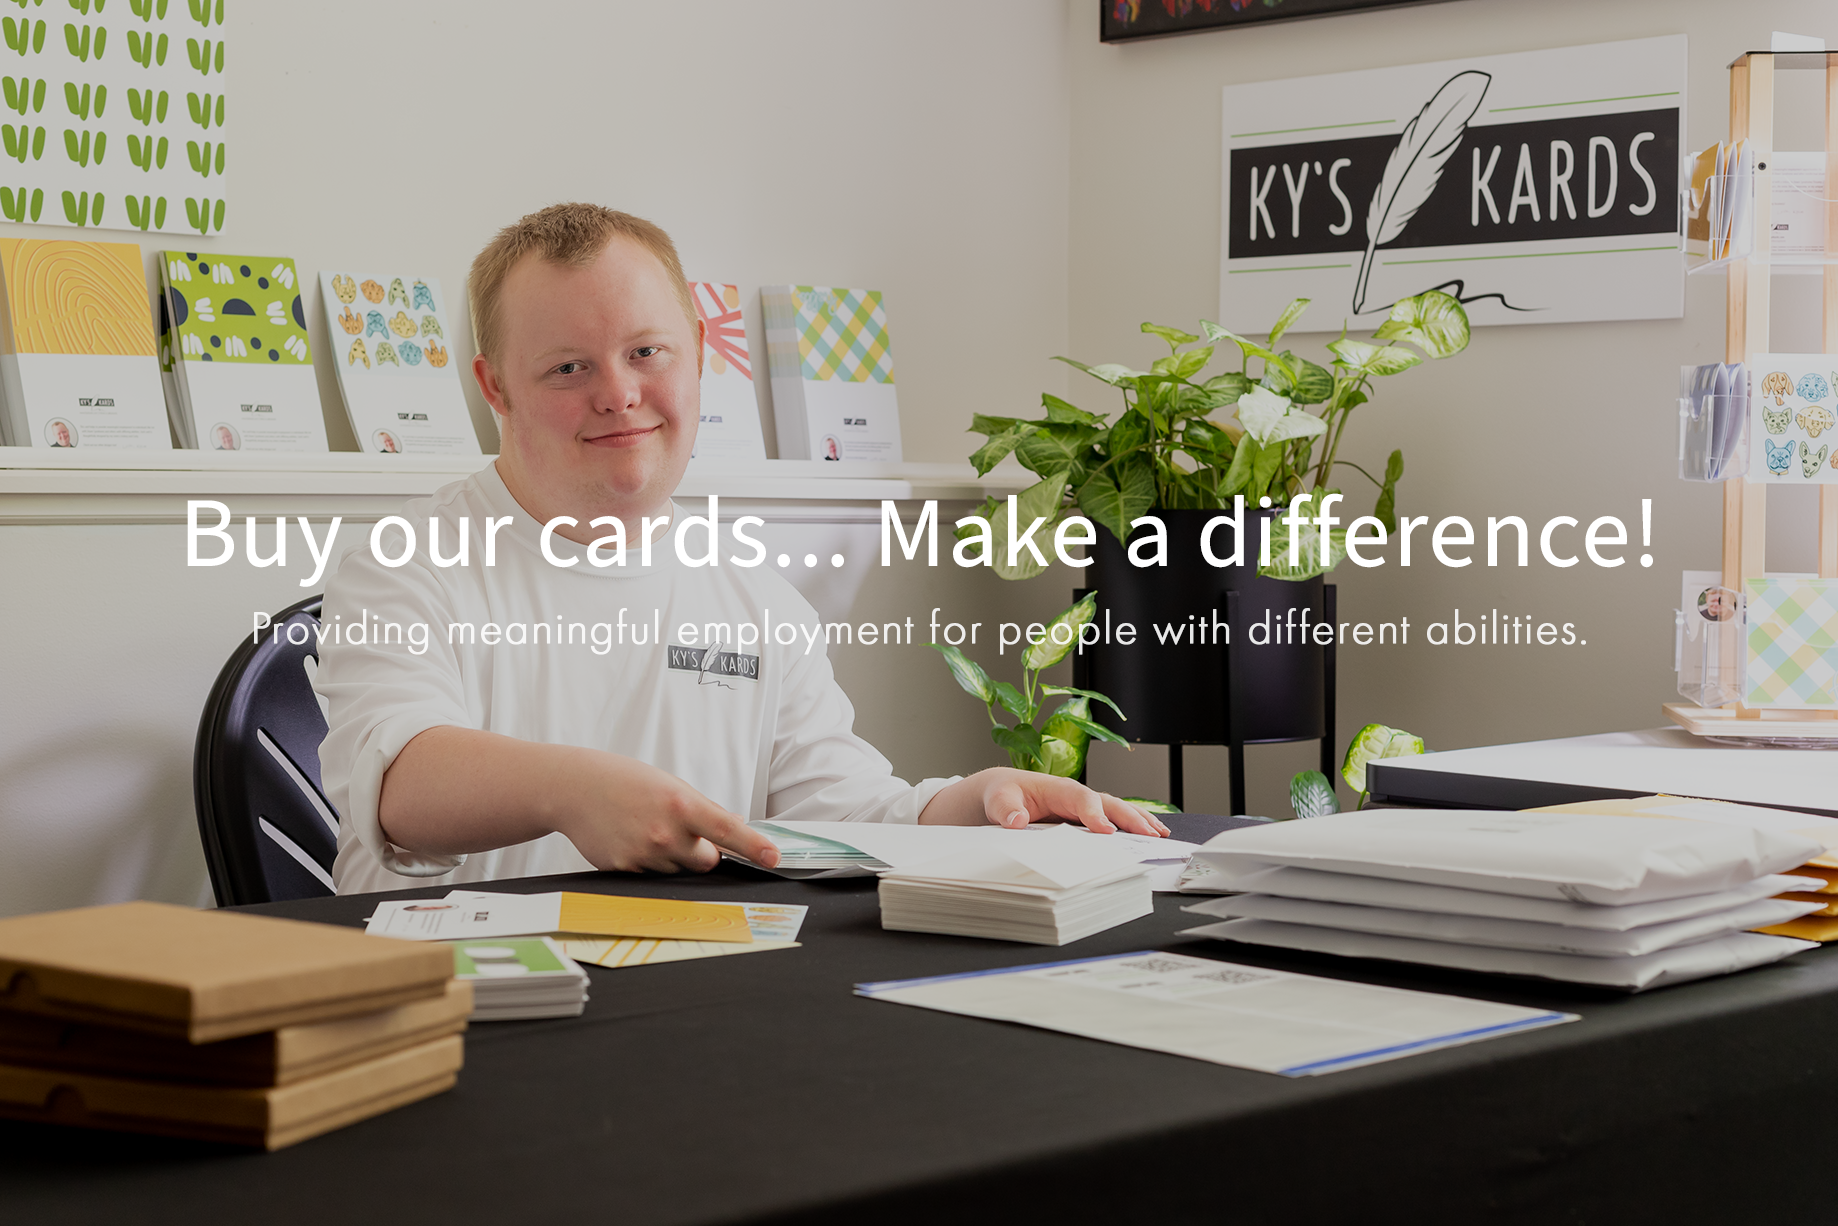 Kyle from Ky's Kards in the office working on packaging greeting cards